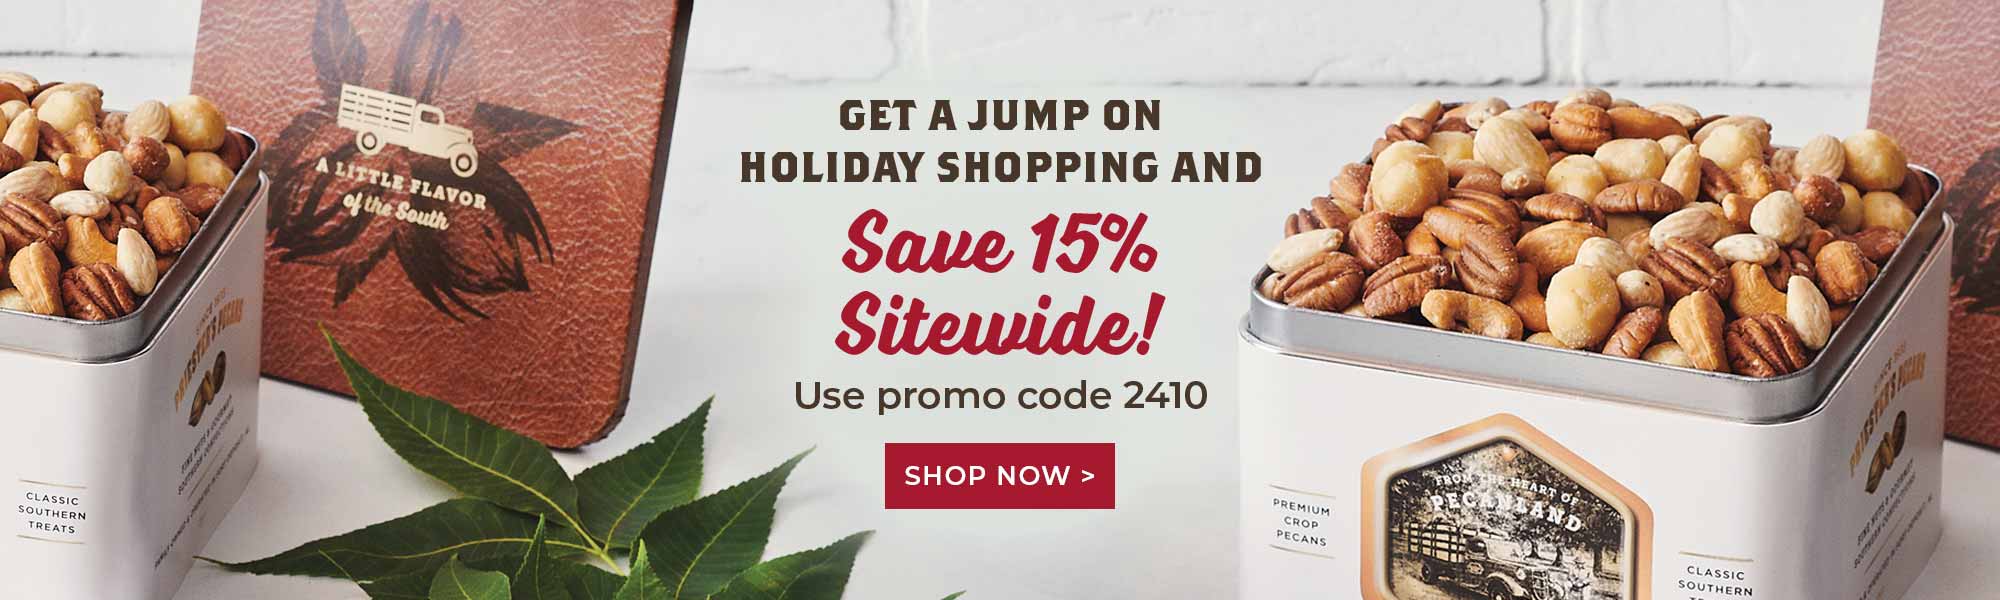 Save 15% Sitewide! Use promo code 2410 >